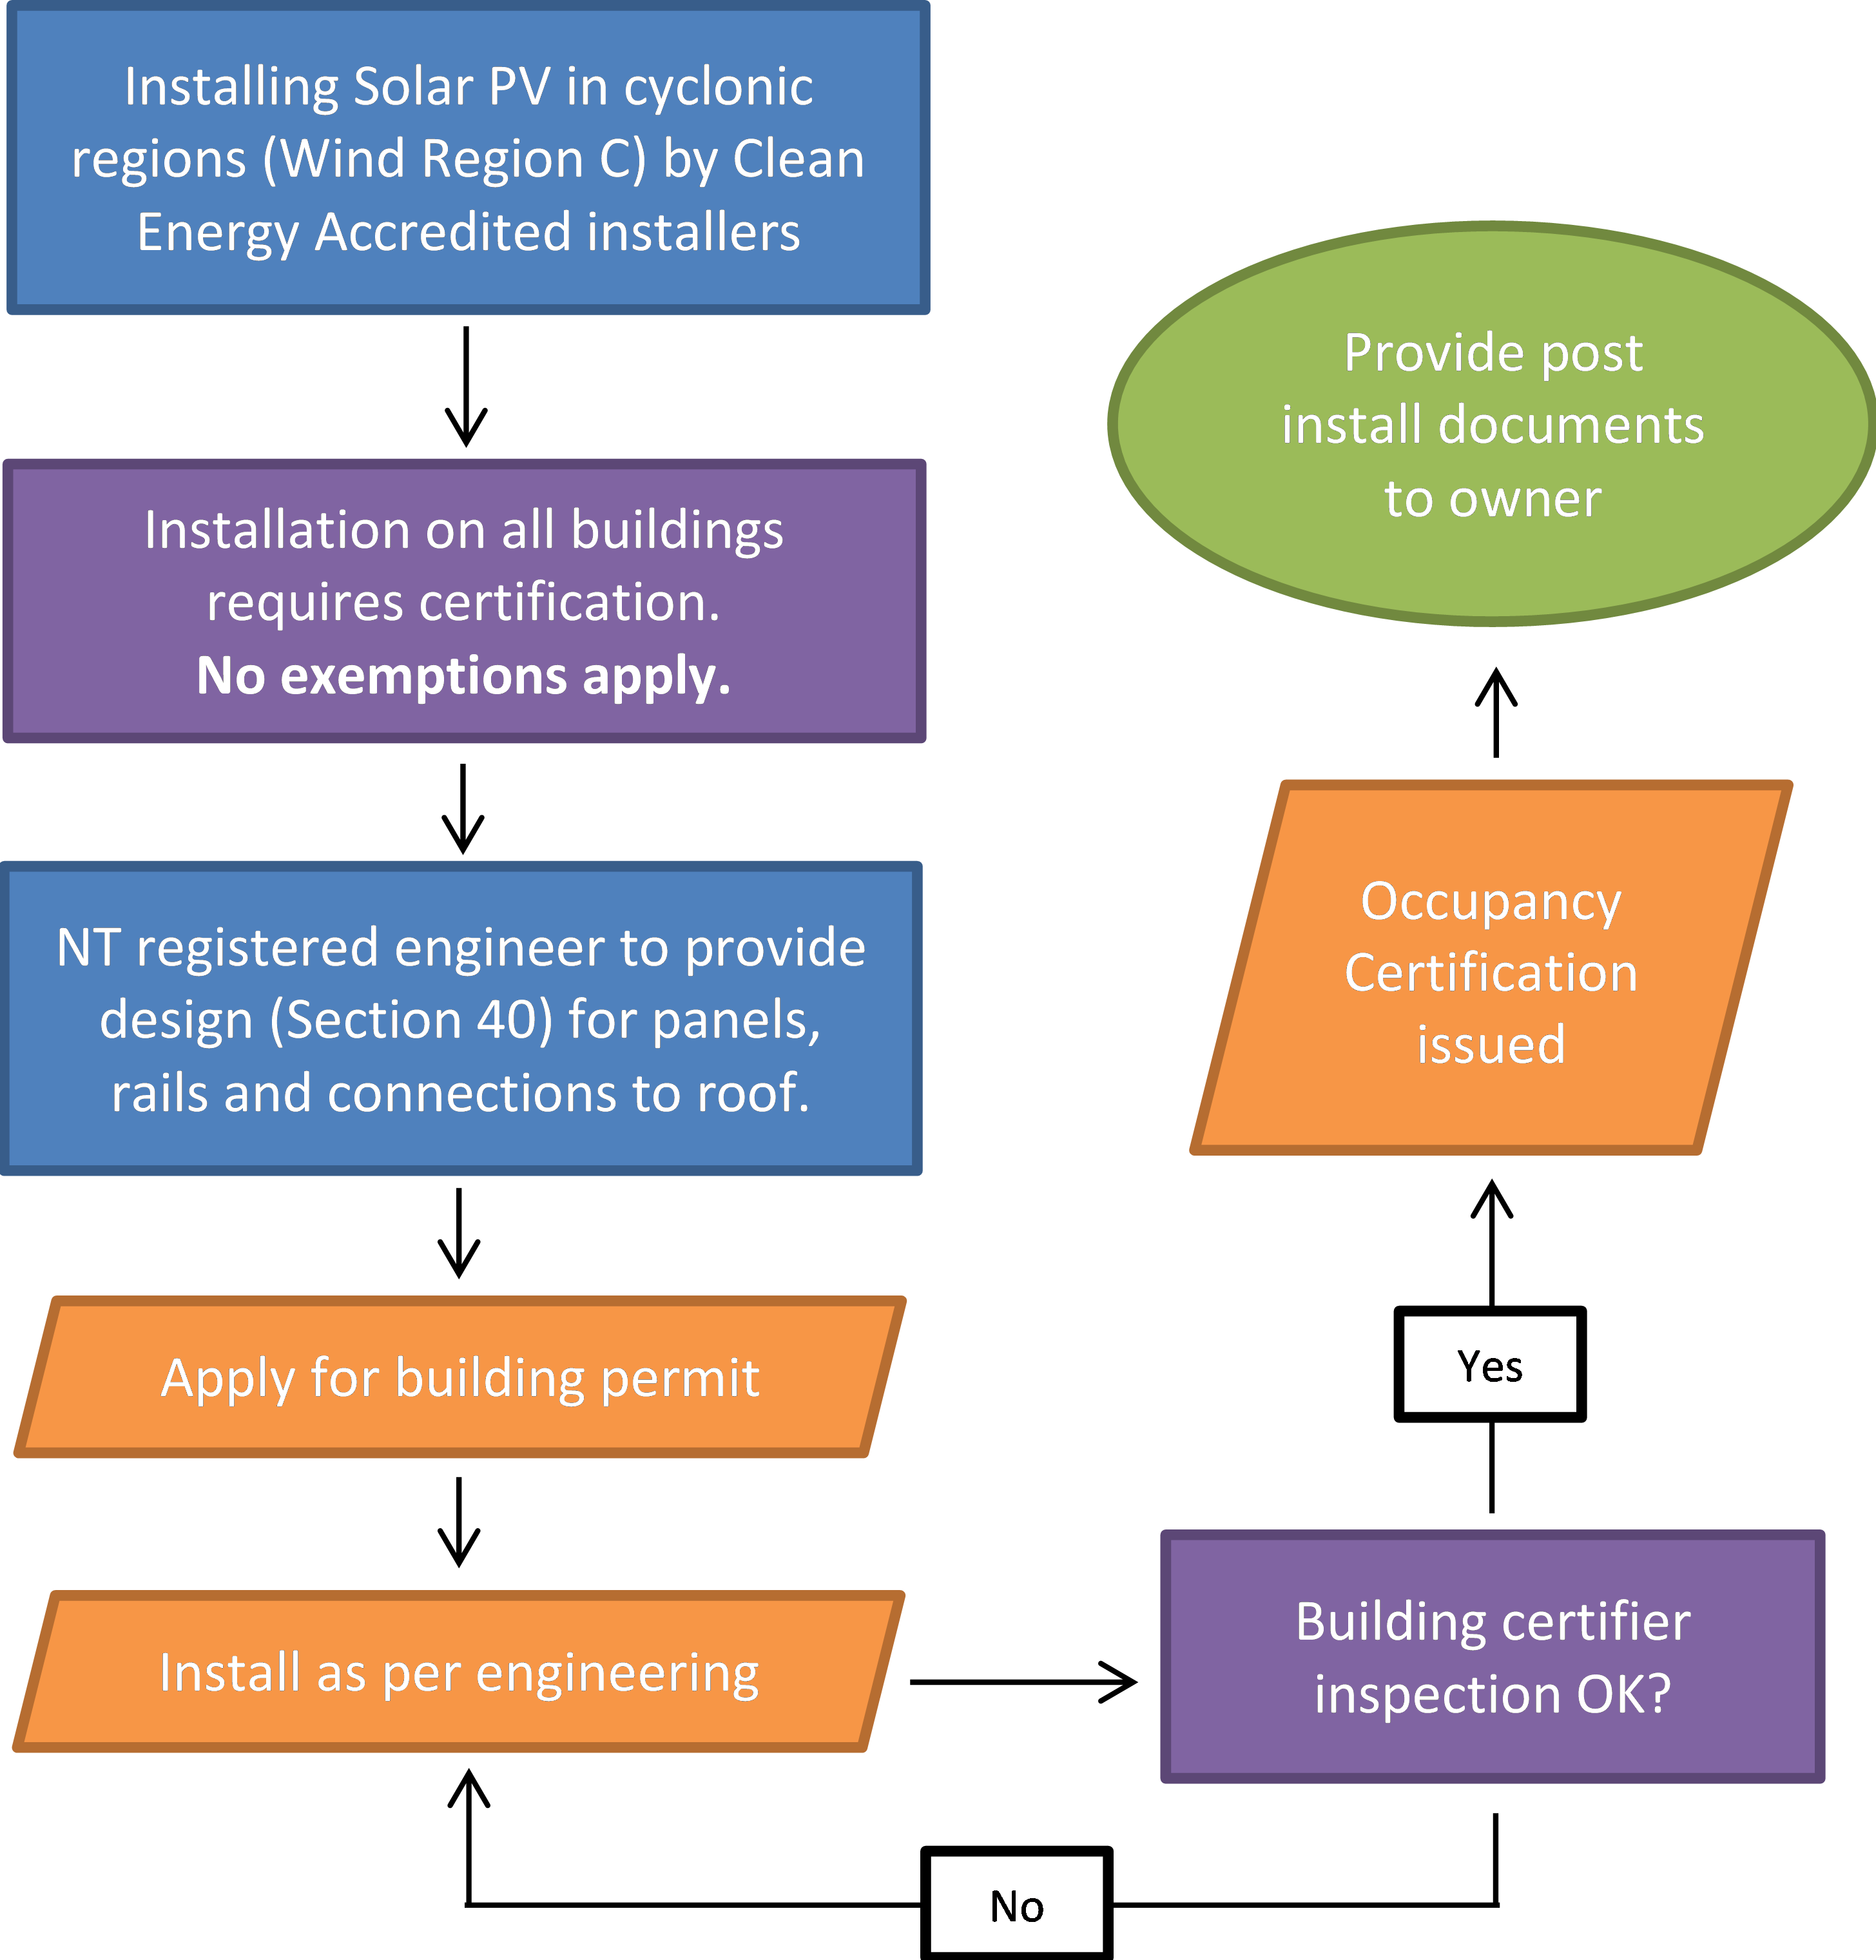 Image of building certification requirements for installing solar PV in cyclonic regions